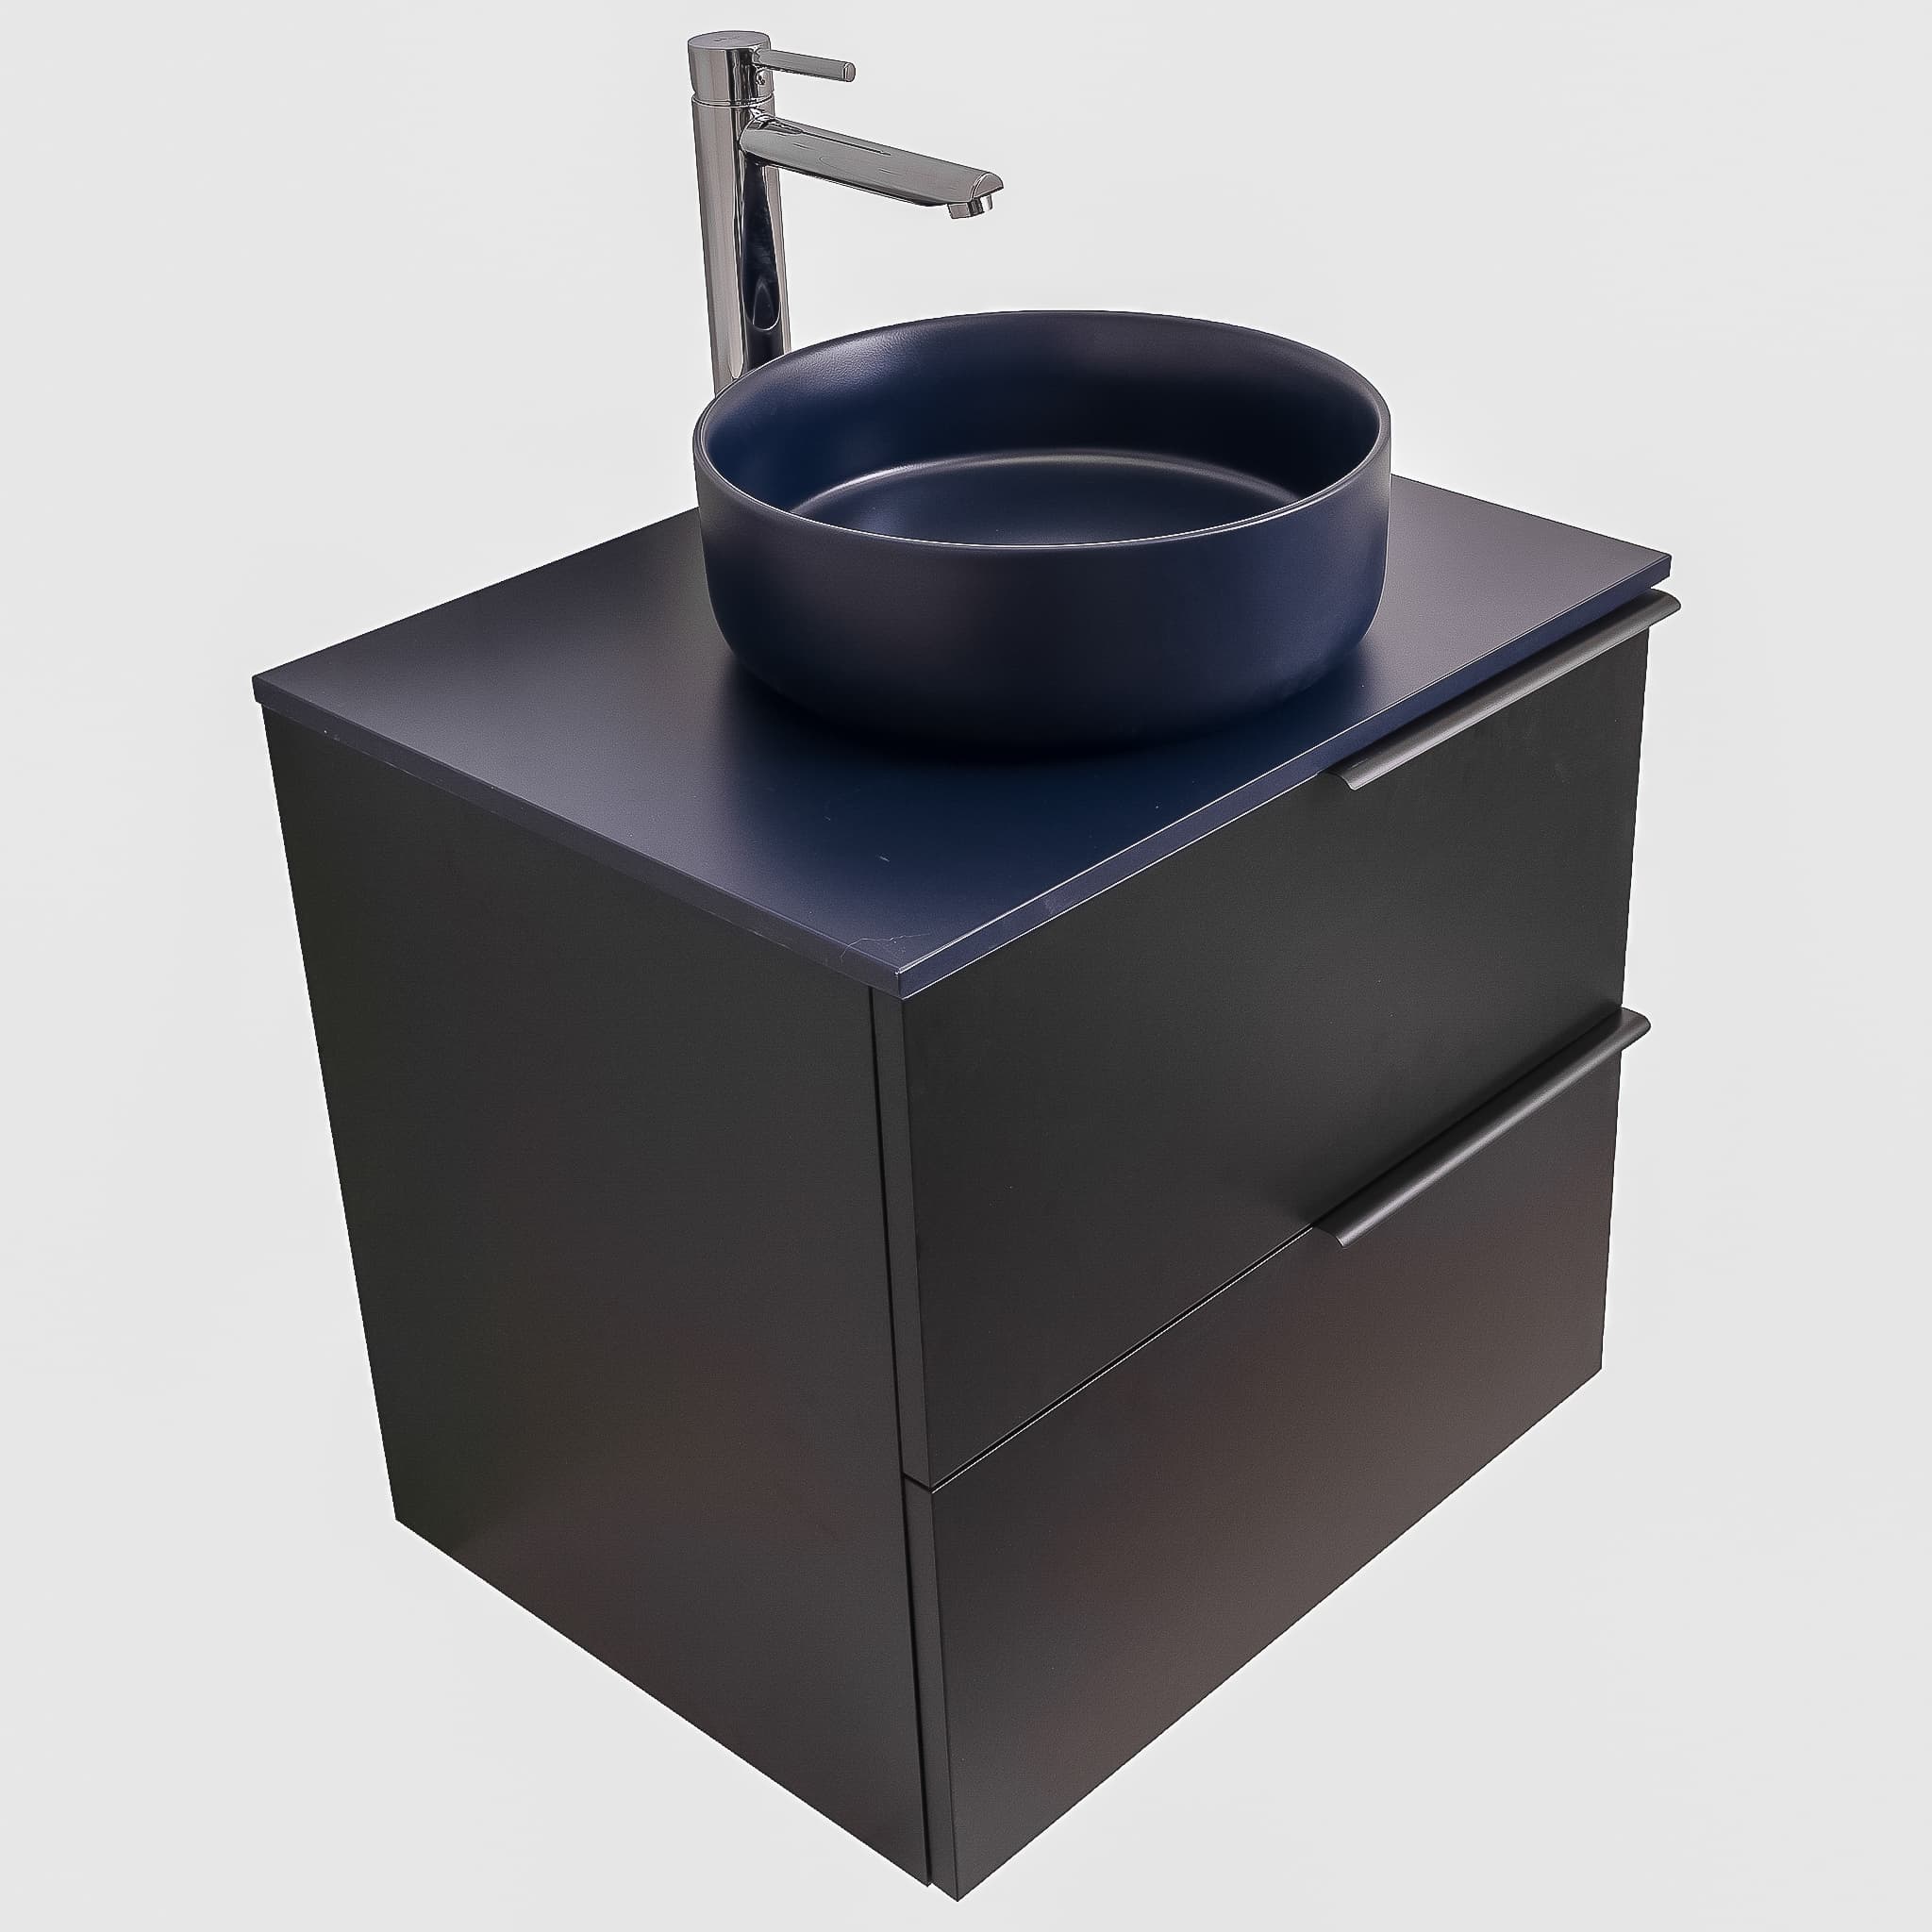 Mallorca 23.5 Matte Black Cabinet, Ares Navy Blue Top And Ares Navy Blue Ceramic Basin, Wall Mounted Modern Vanity Set